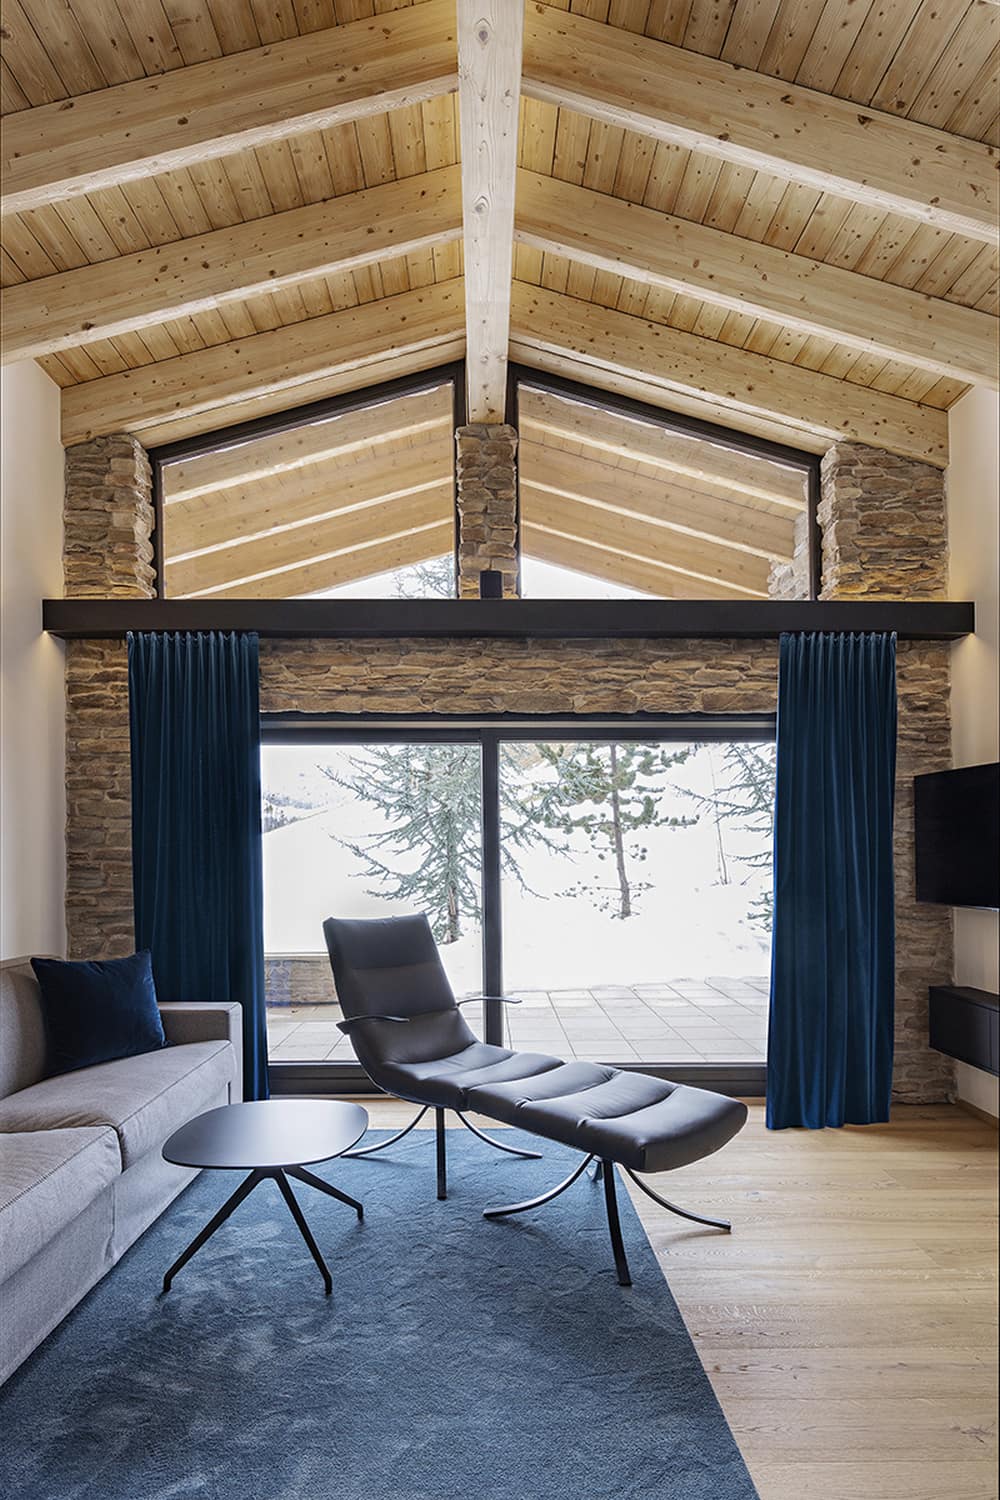 Villa in the Alps. Wooden and Metal Structure for an Organic Minimalism